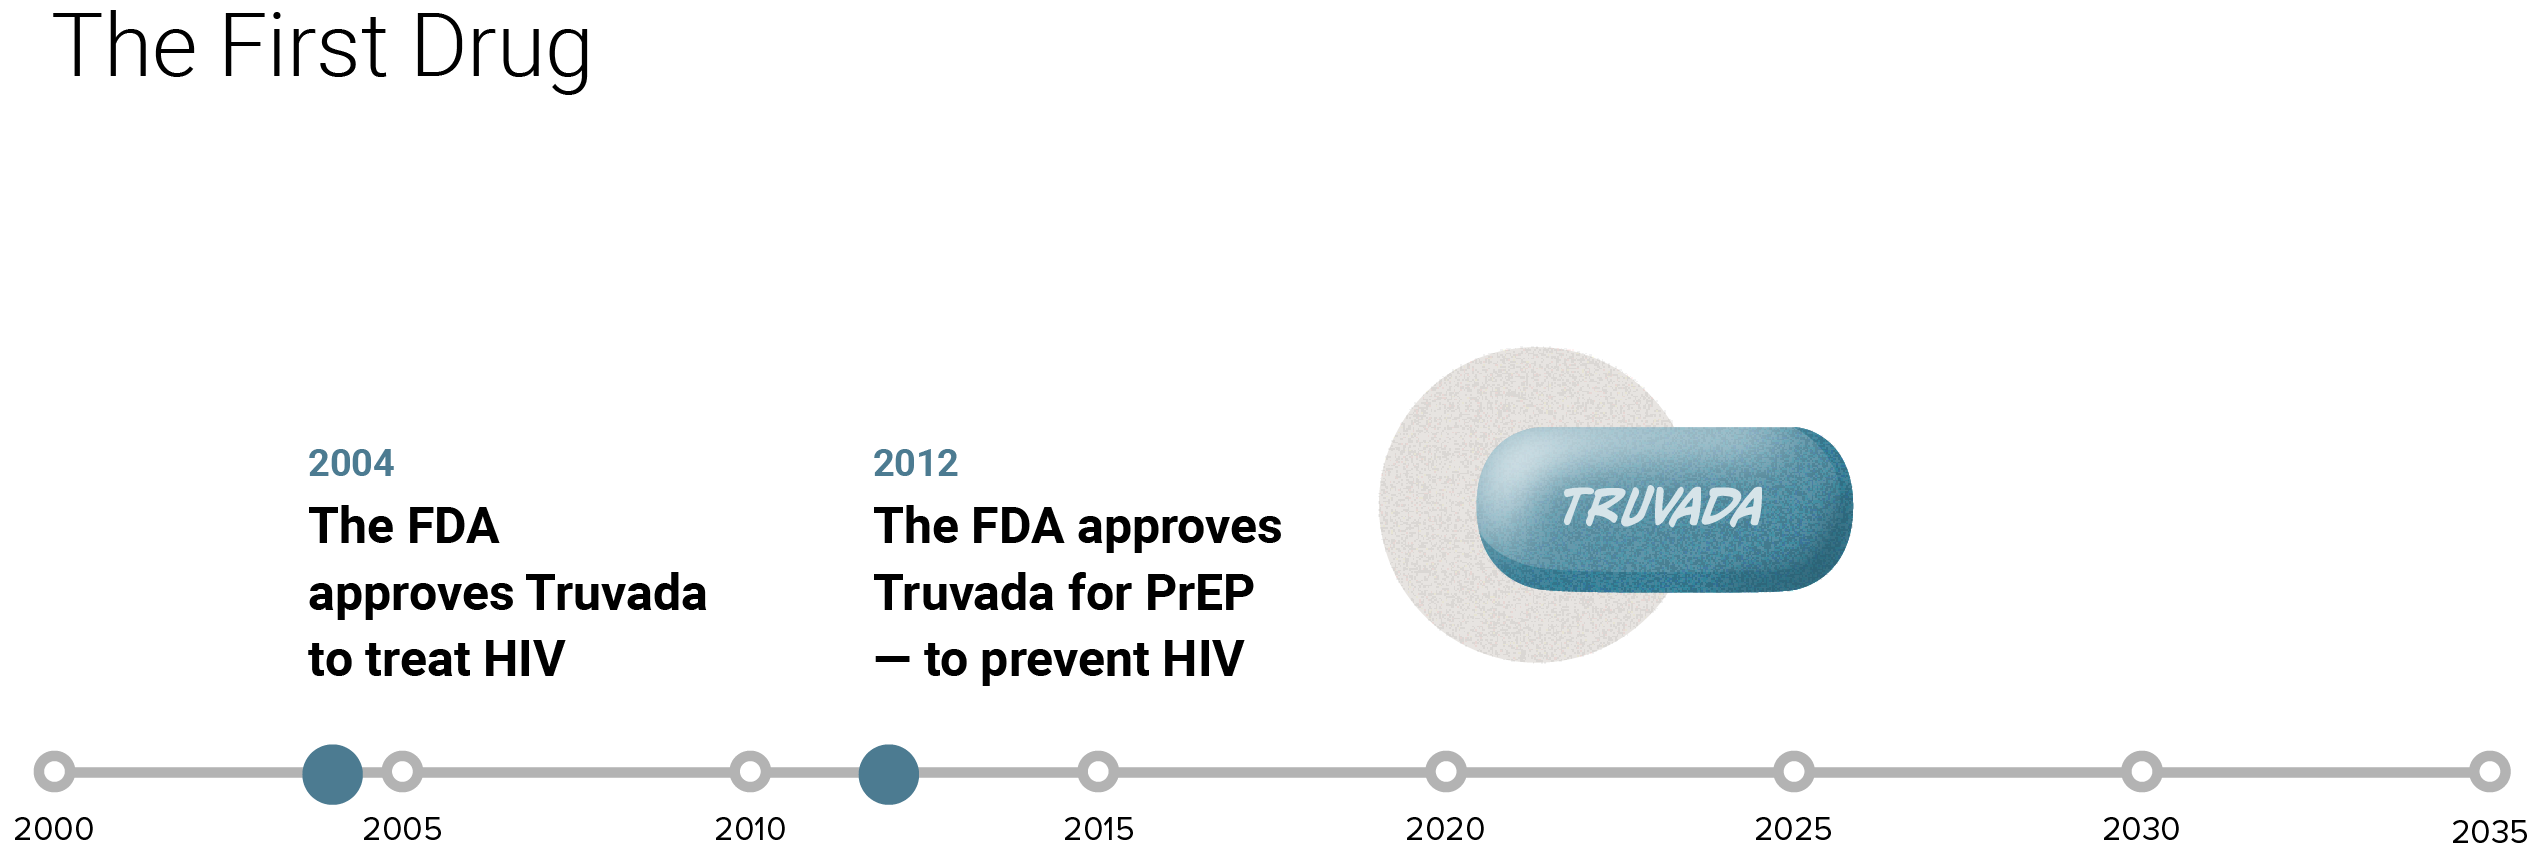 This step of the timeline has the headline: The First Drug. The timeline has the following items plotted with blue dots between 2000 and 2035, all related to Truvada. 2004, The FDA approves Truvada to treat HIV. 2012, The FDA approves Truvada for PrEP — to prevent HIV. There is an illustration of a blue Truvada pill.